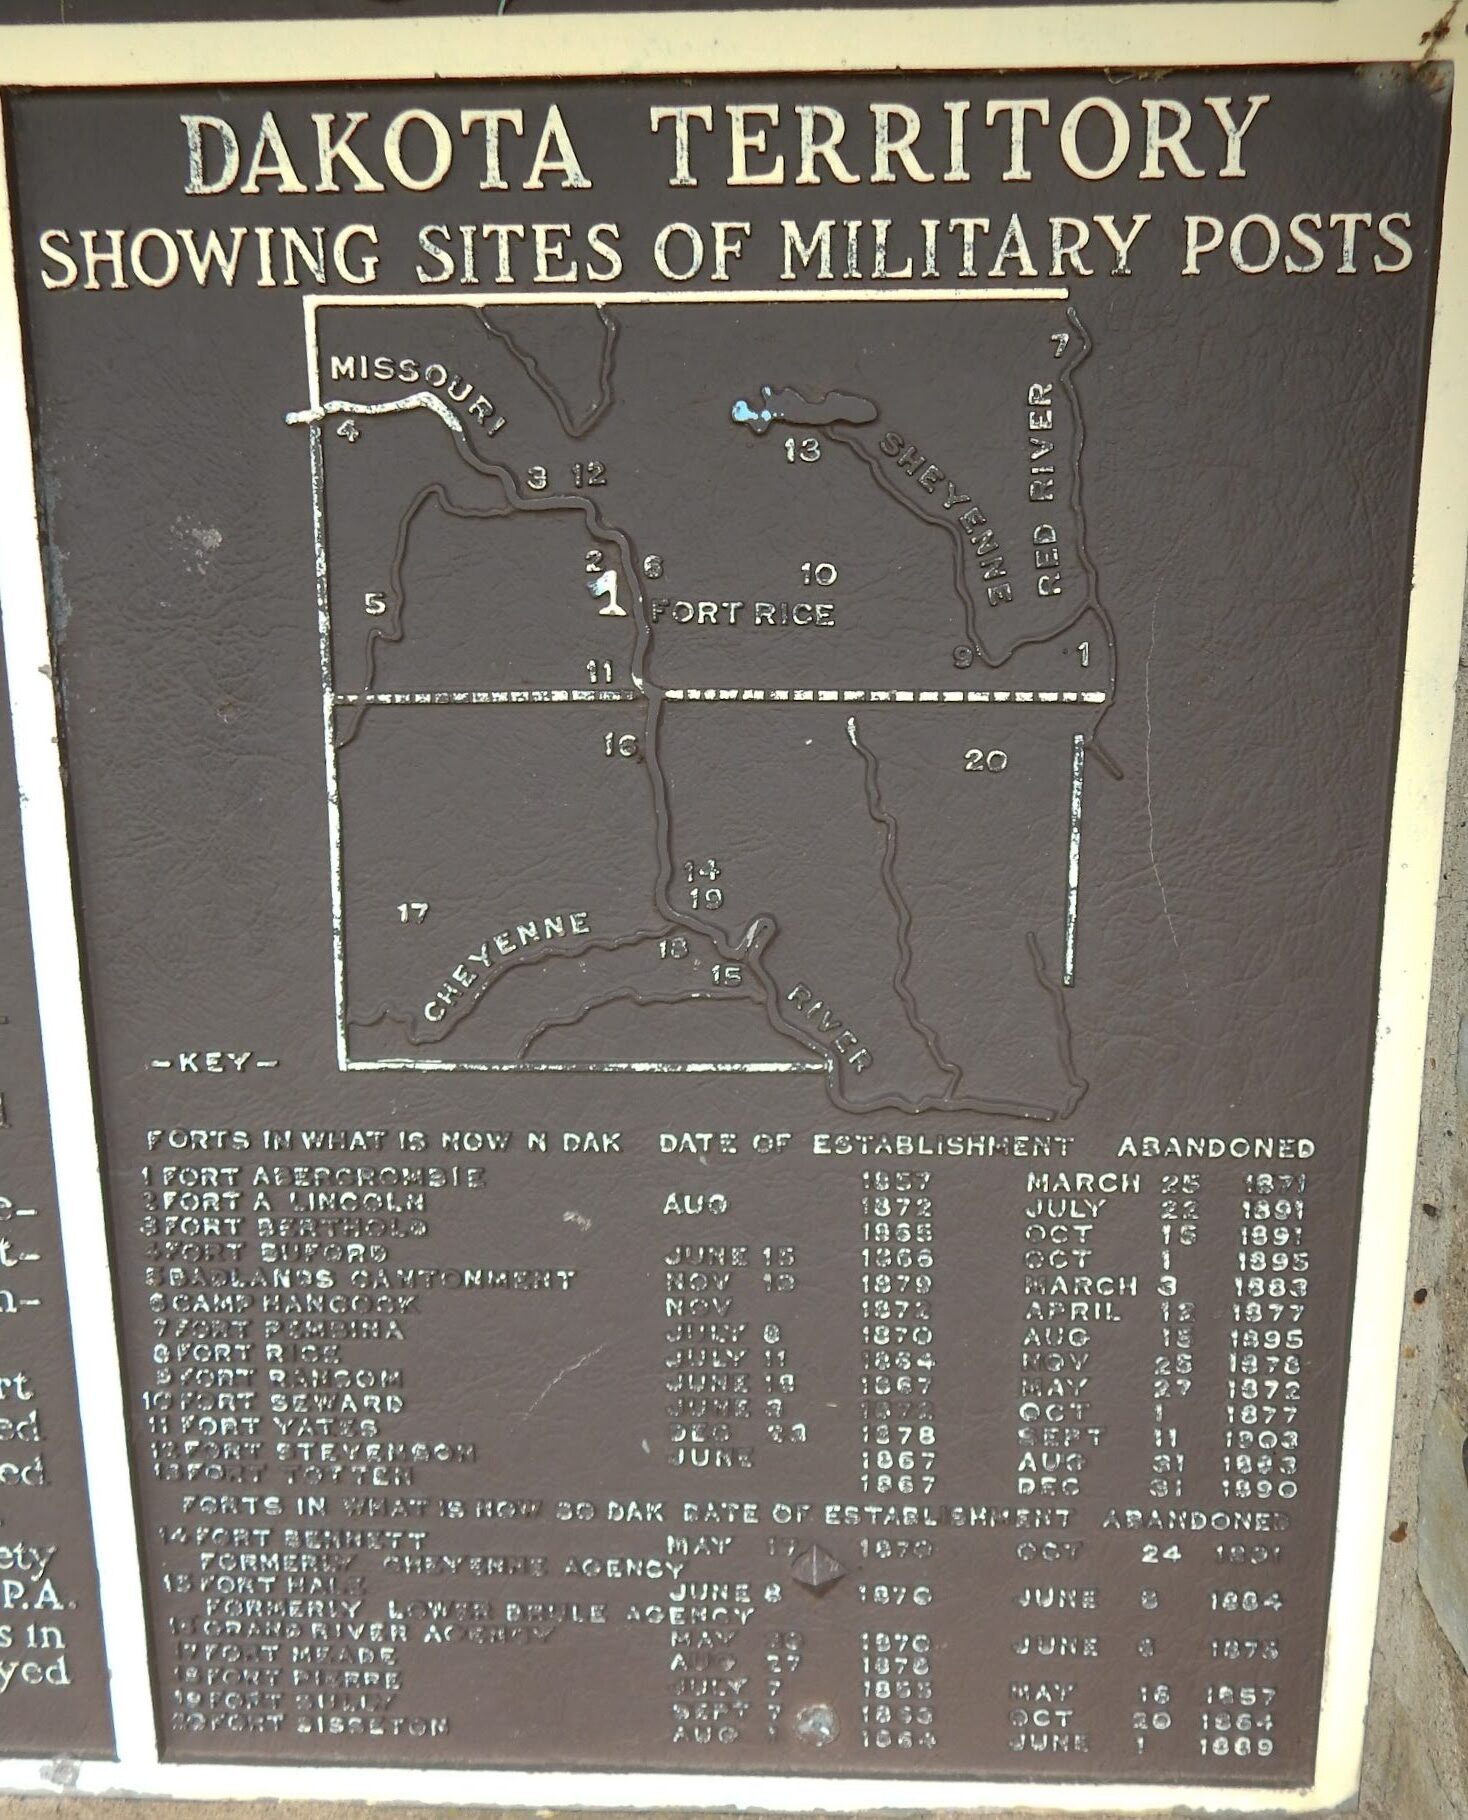 Fort Rice Military Posts sign